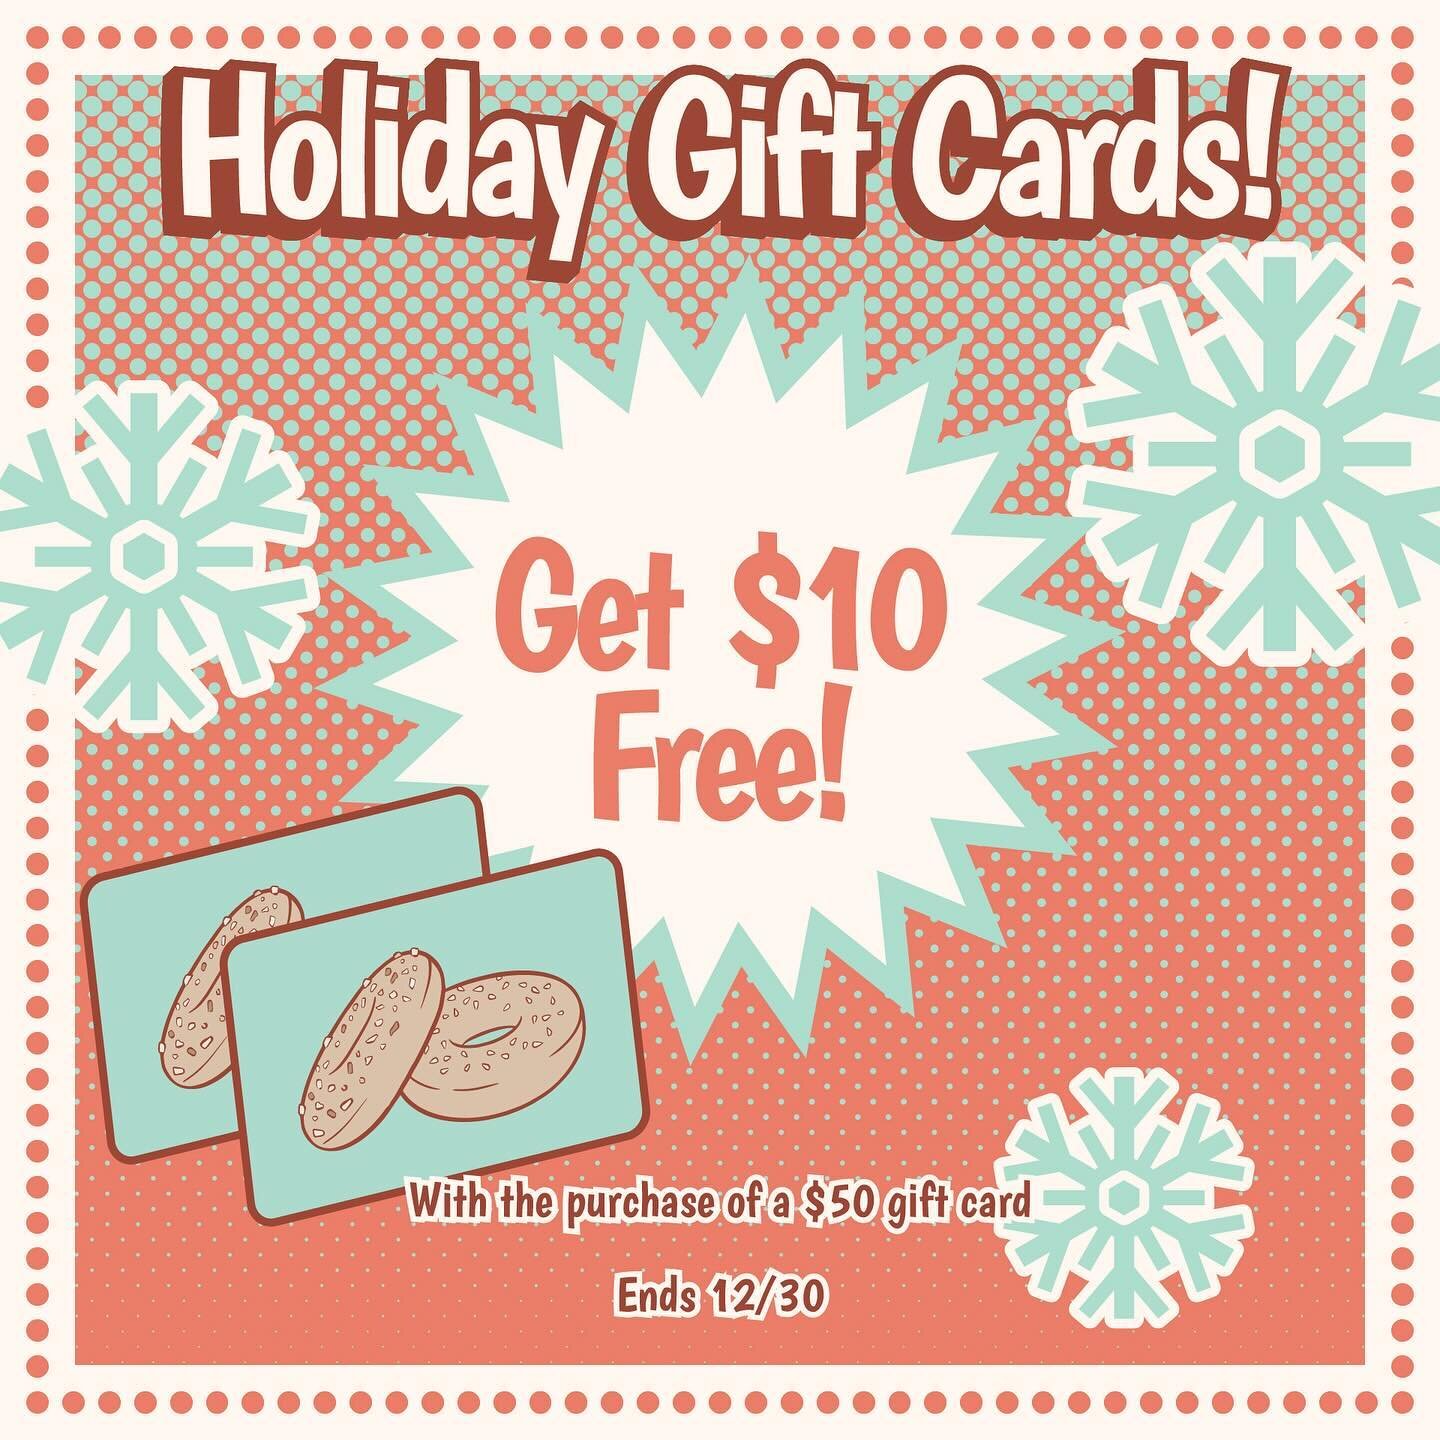 It&rsquo;s BAAAAACK bagel lovers!!!💙🤍🥯❤️💚 GOLDSTEIN'S gift cards make the perfect holiday gift for everyone in your life. This holiday season the more you buy the more you earn. Every $50 in gift cards purchased earns you an additional $10 in bag